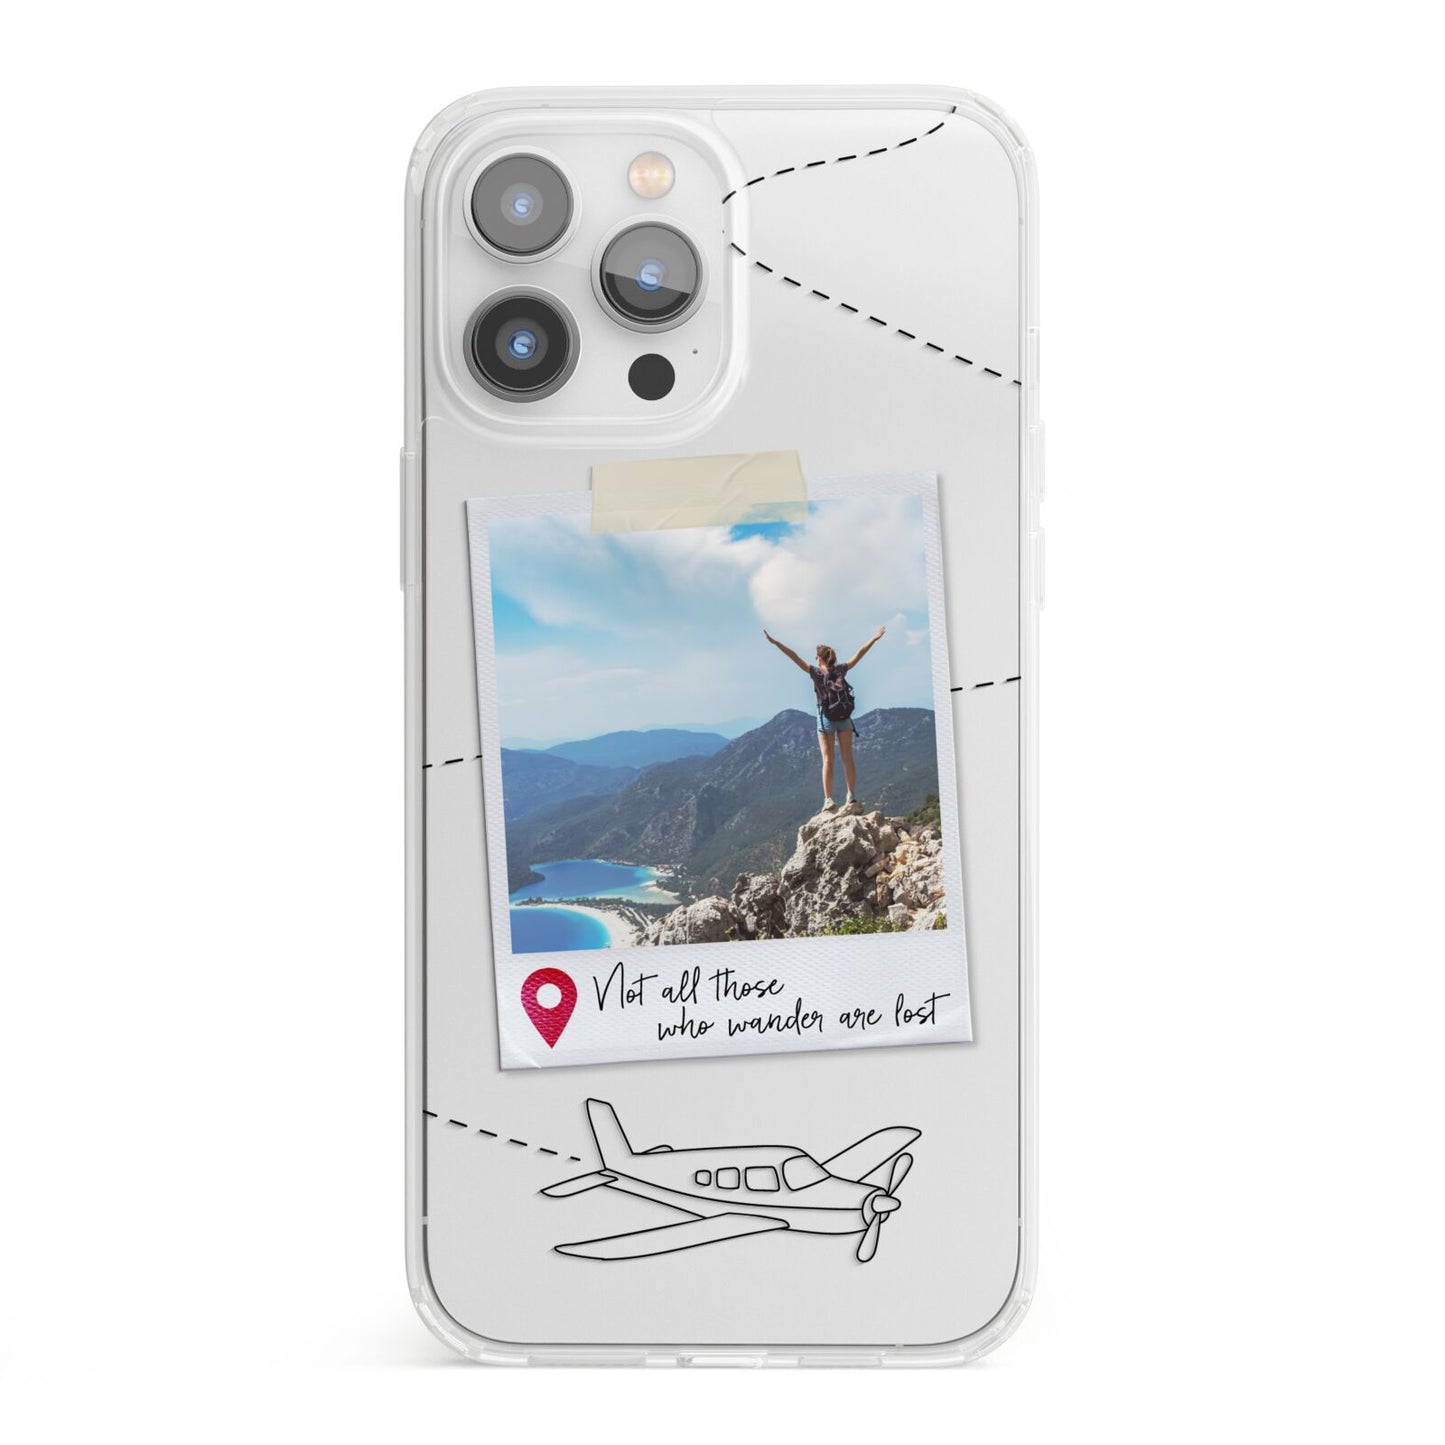 Backpacker Photo Upload Personalised iPhone 13 Pro Max Clear Bumper Case